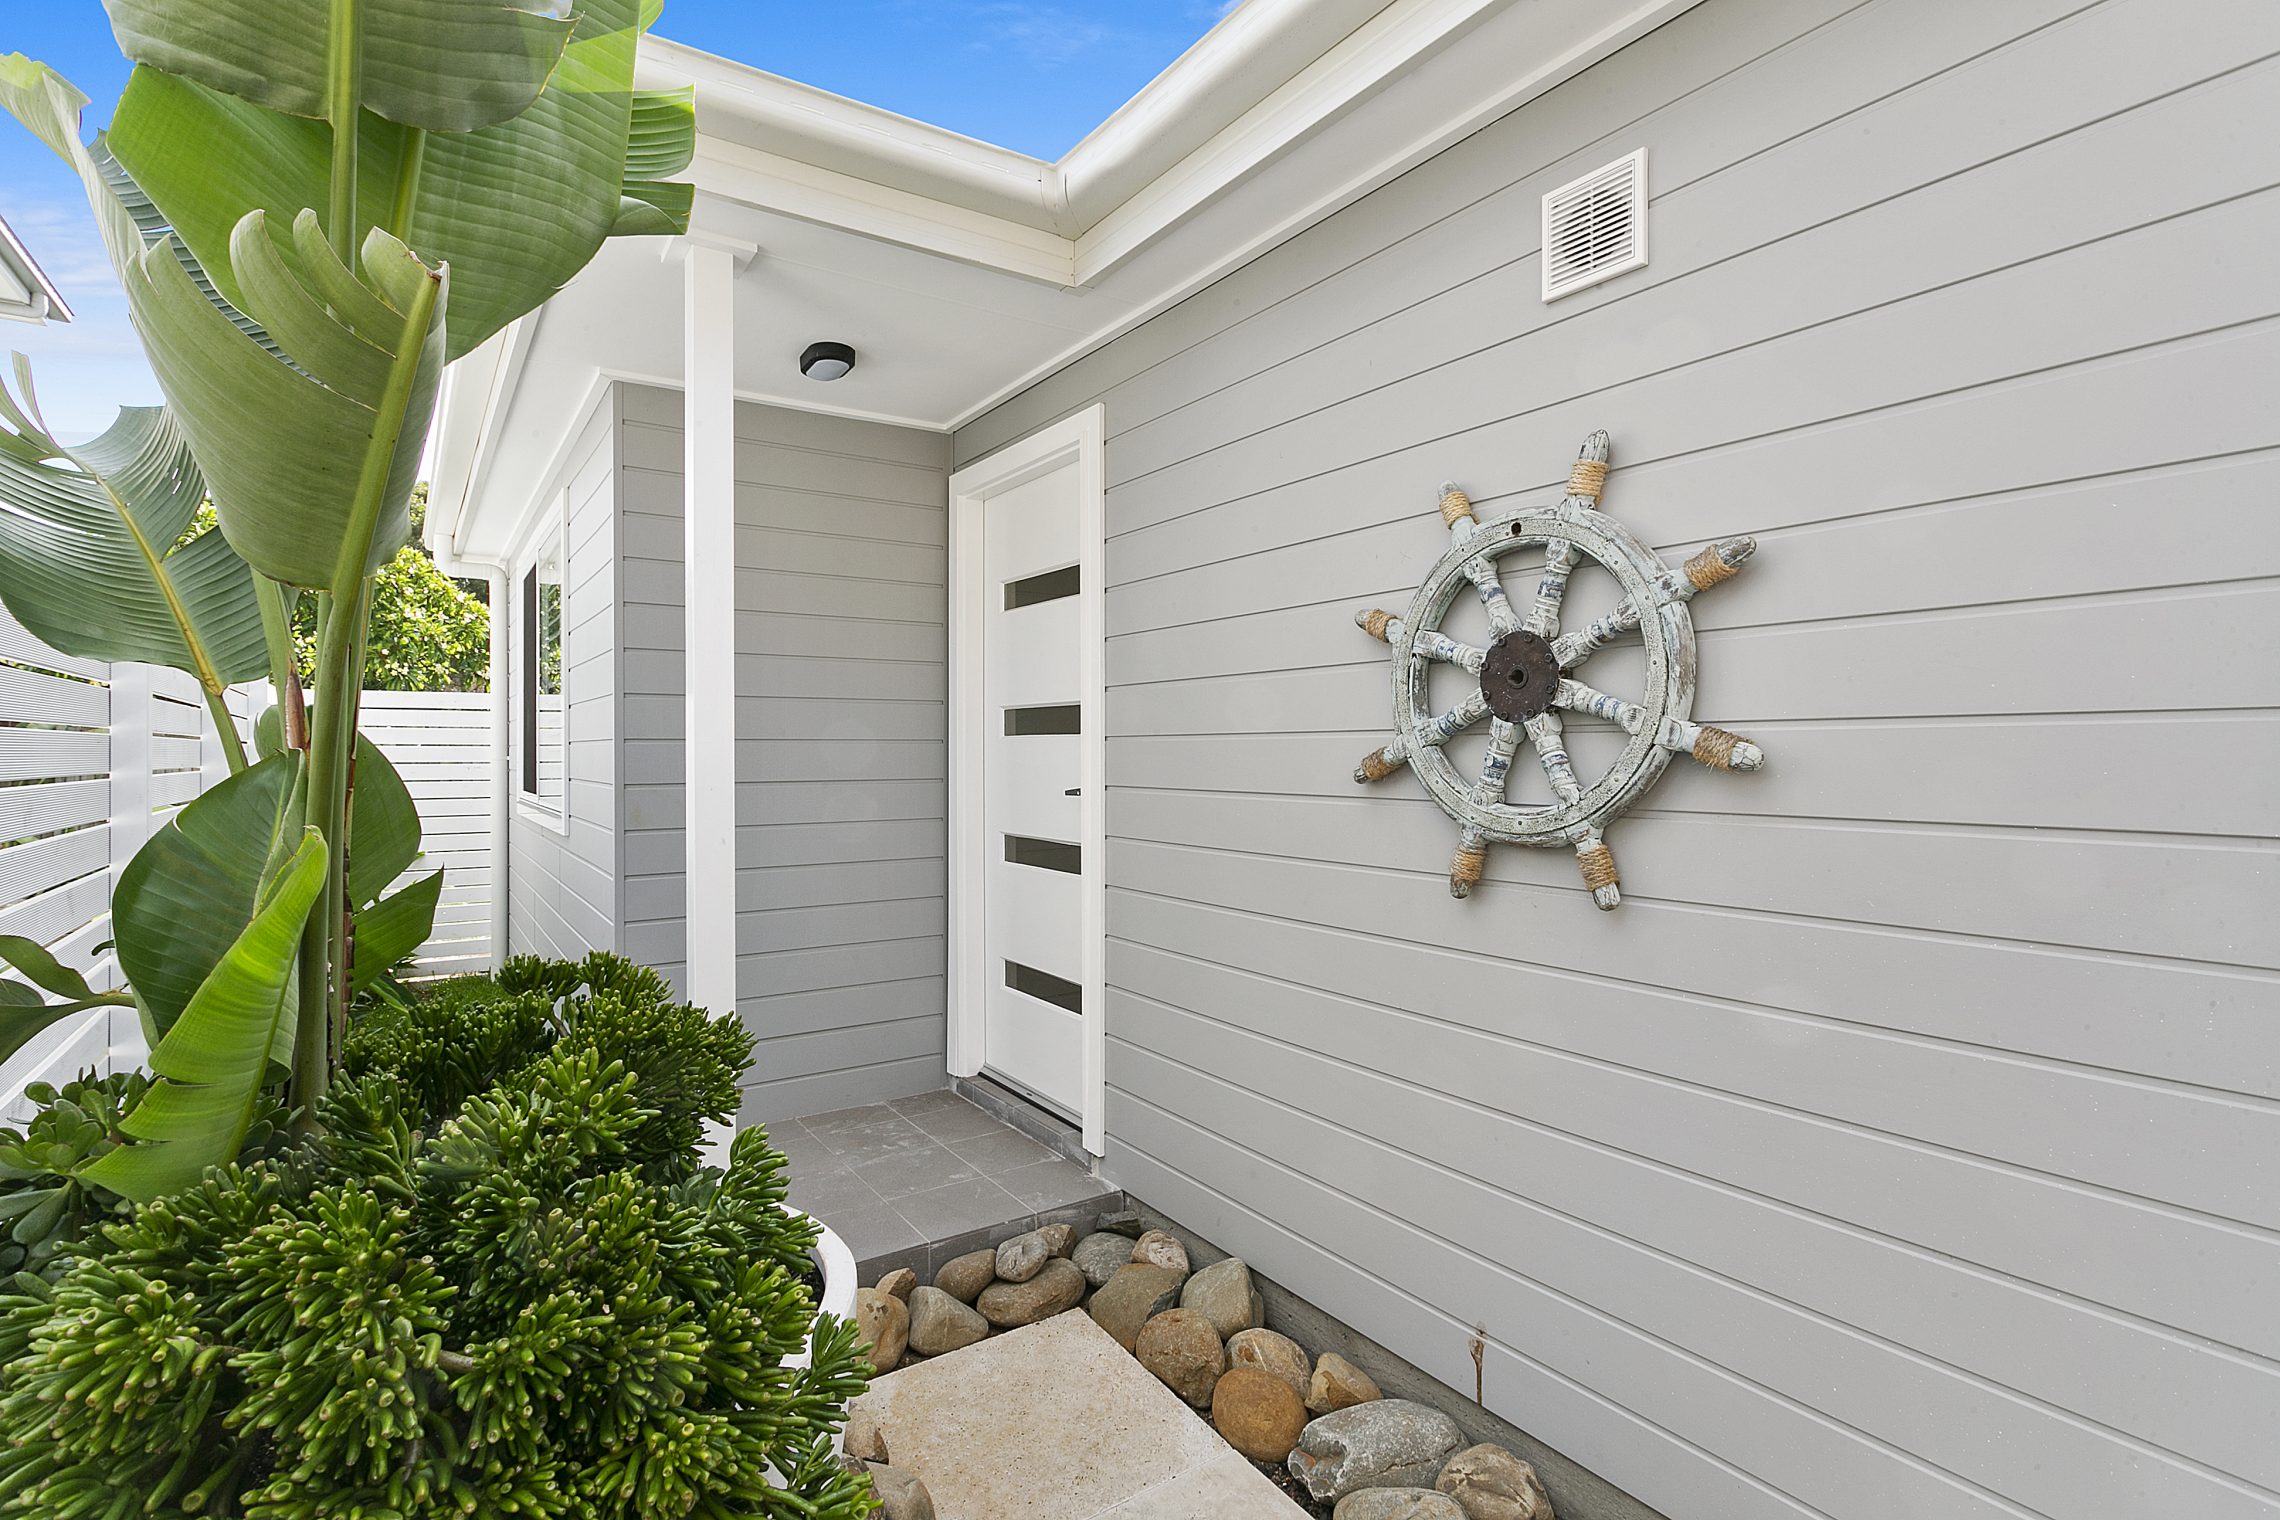 Modern entry way to granny flat with decorative sailor's wheel on the exterior wall